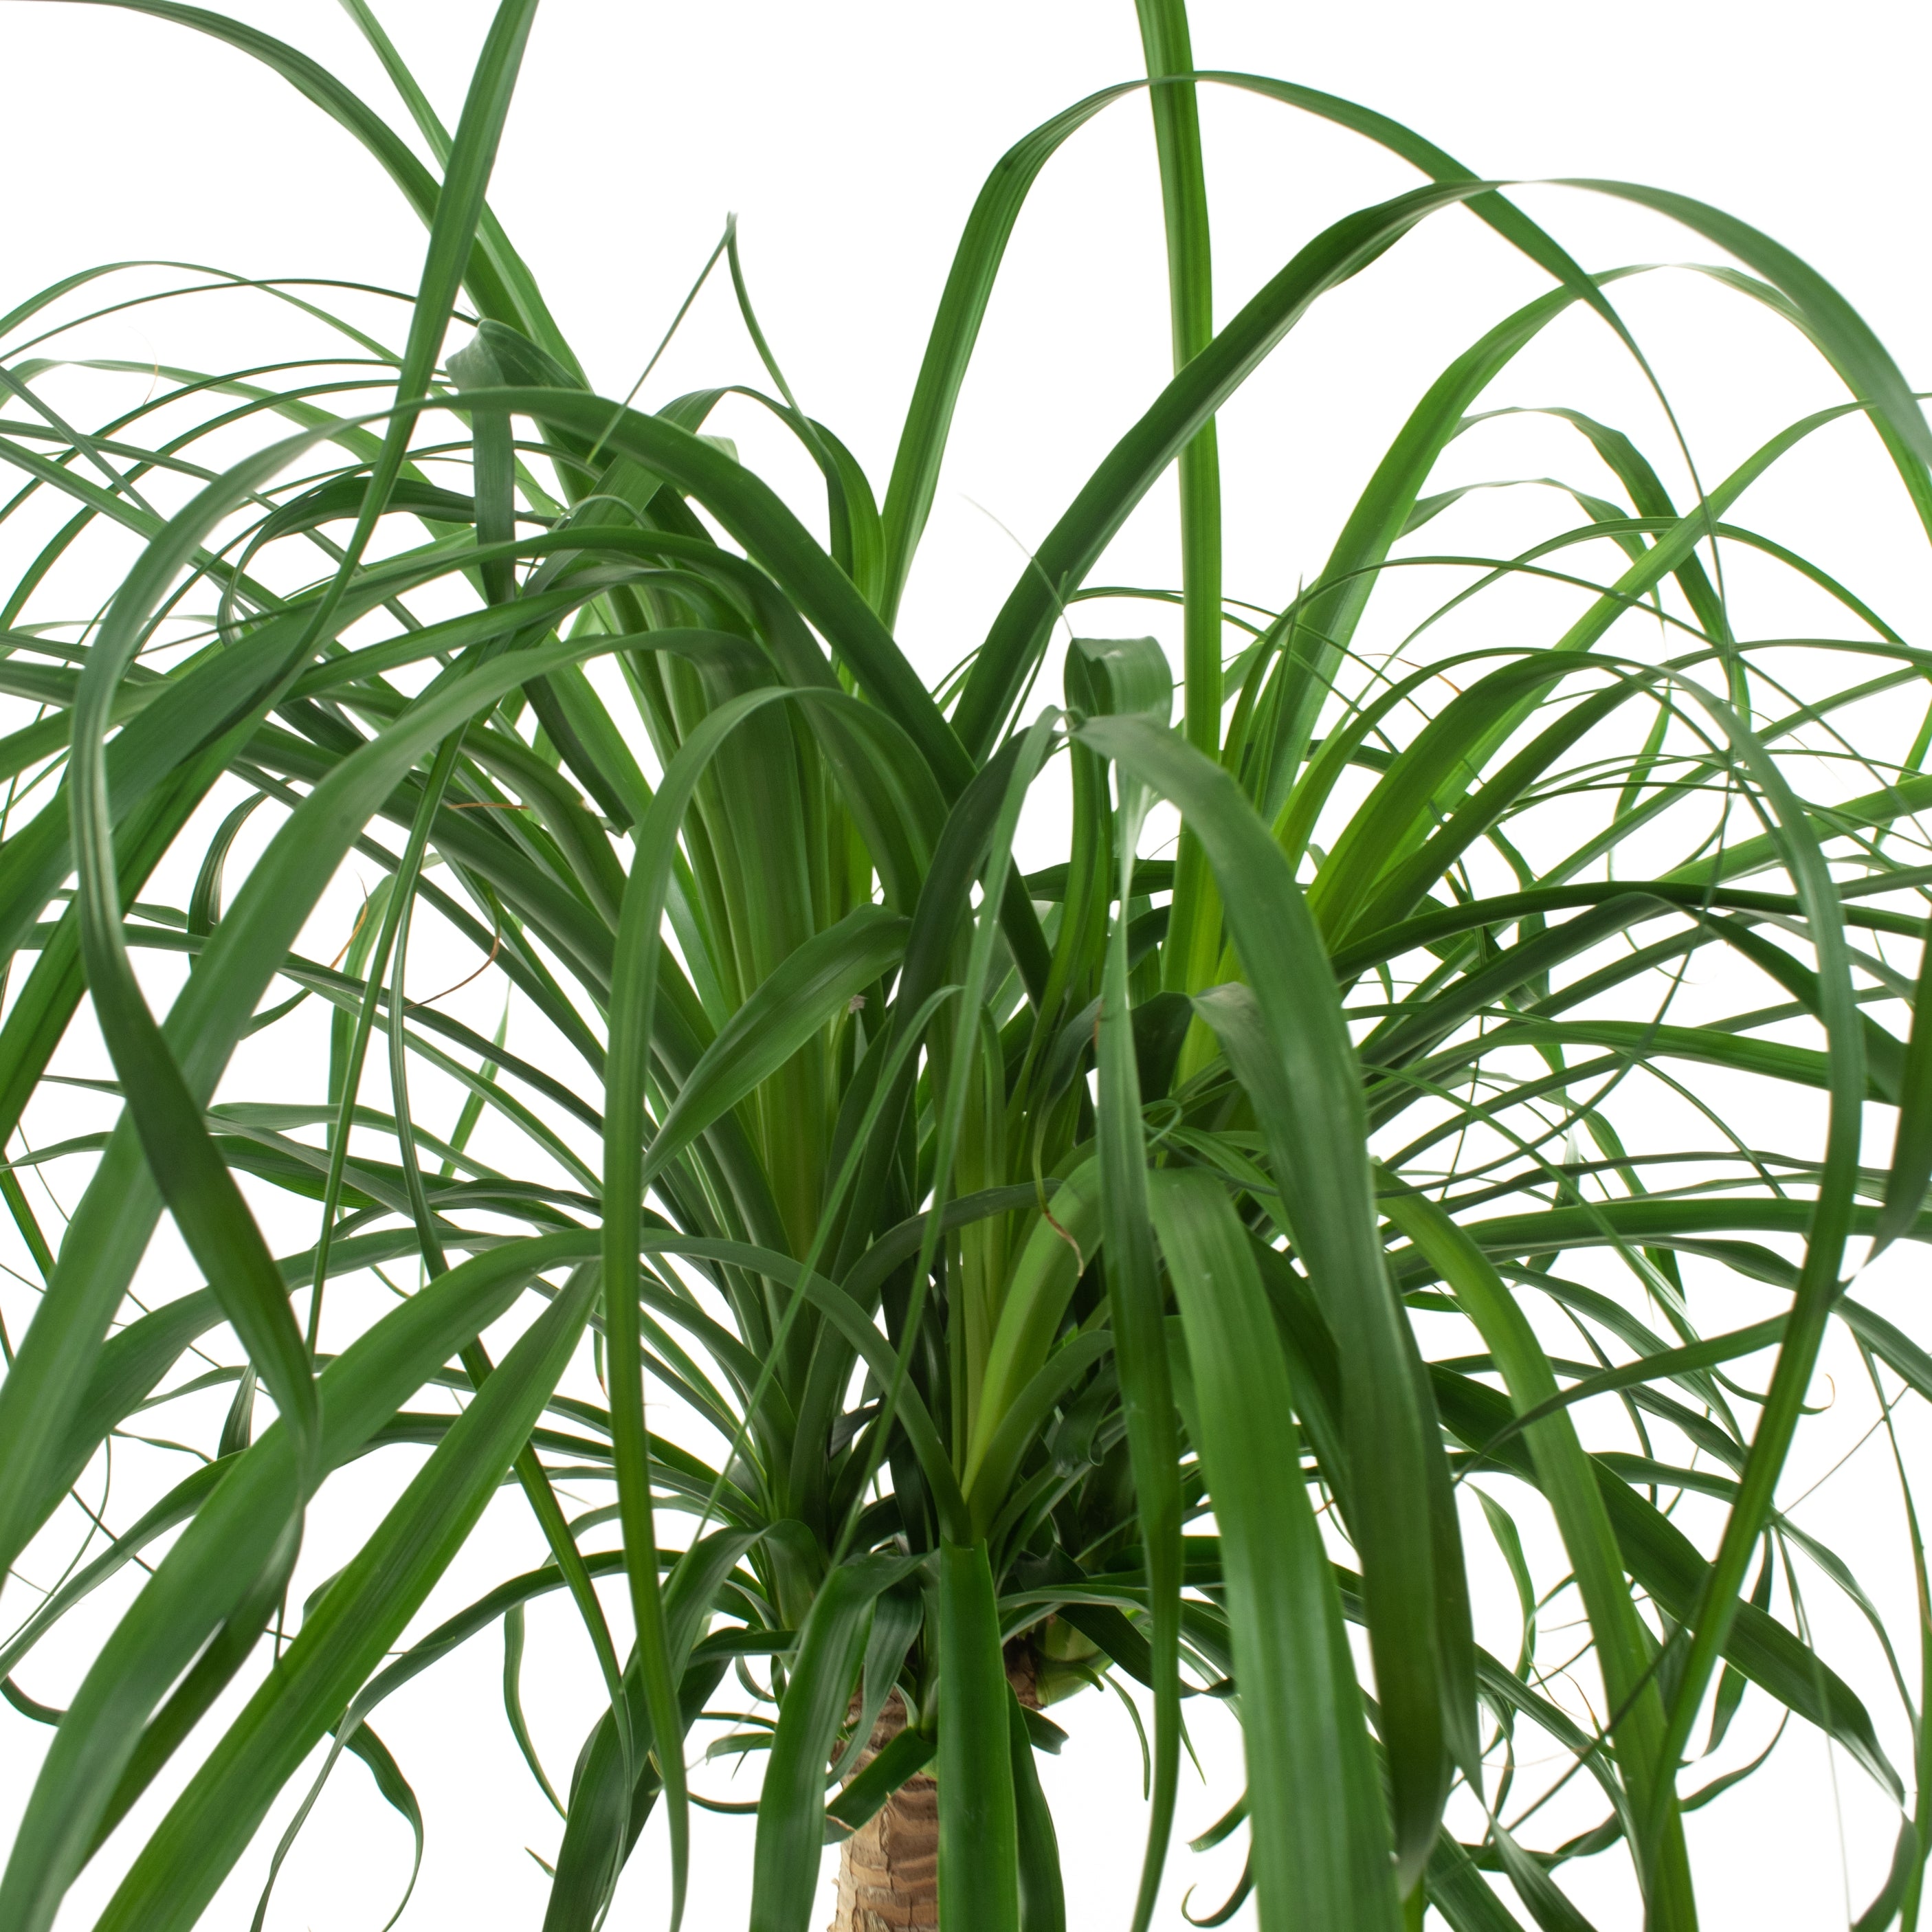 10 In. Ponytail Palm Houseplant